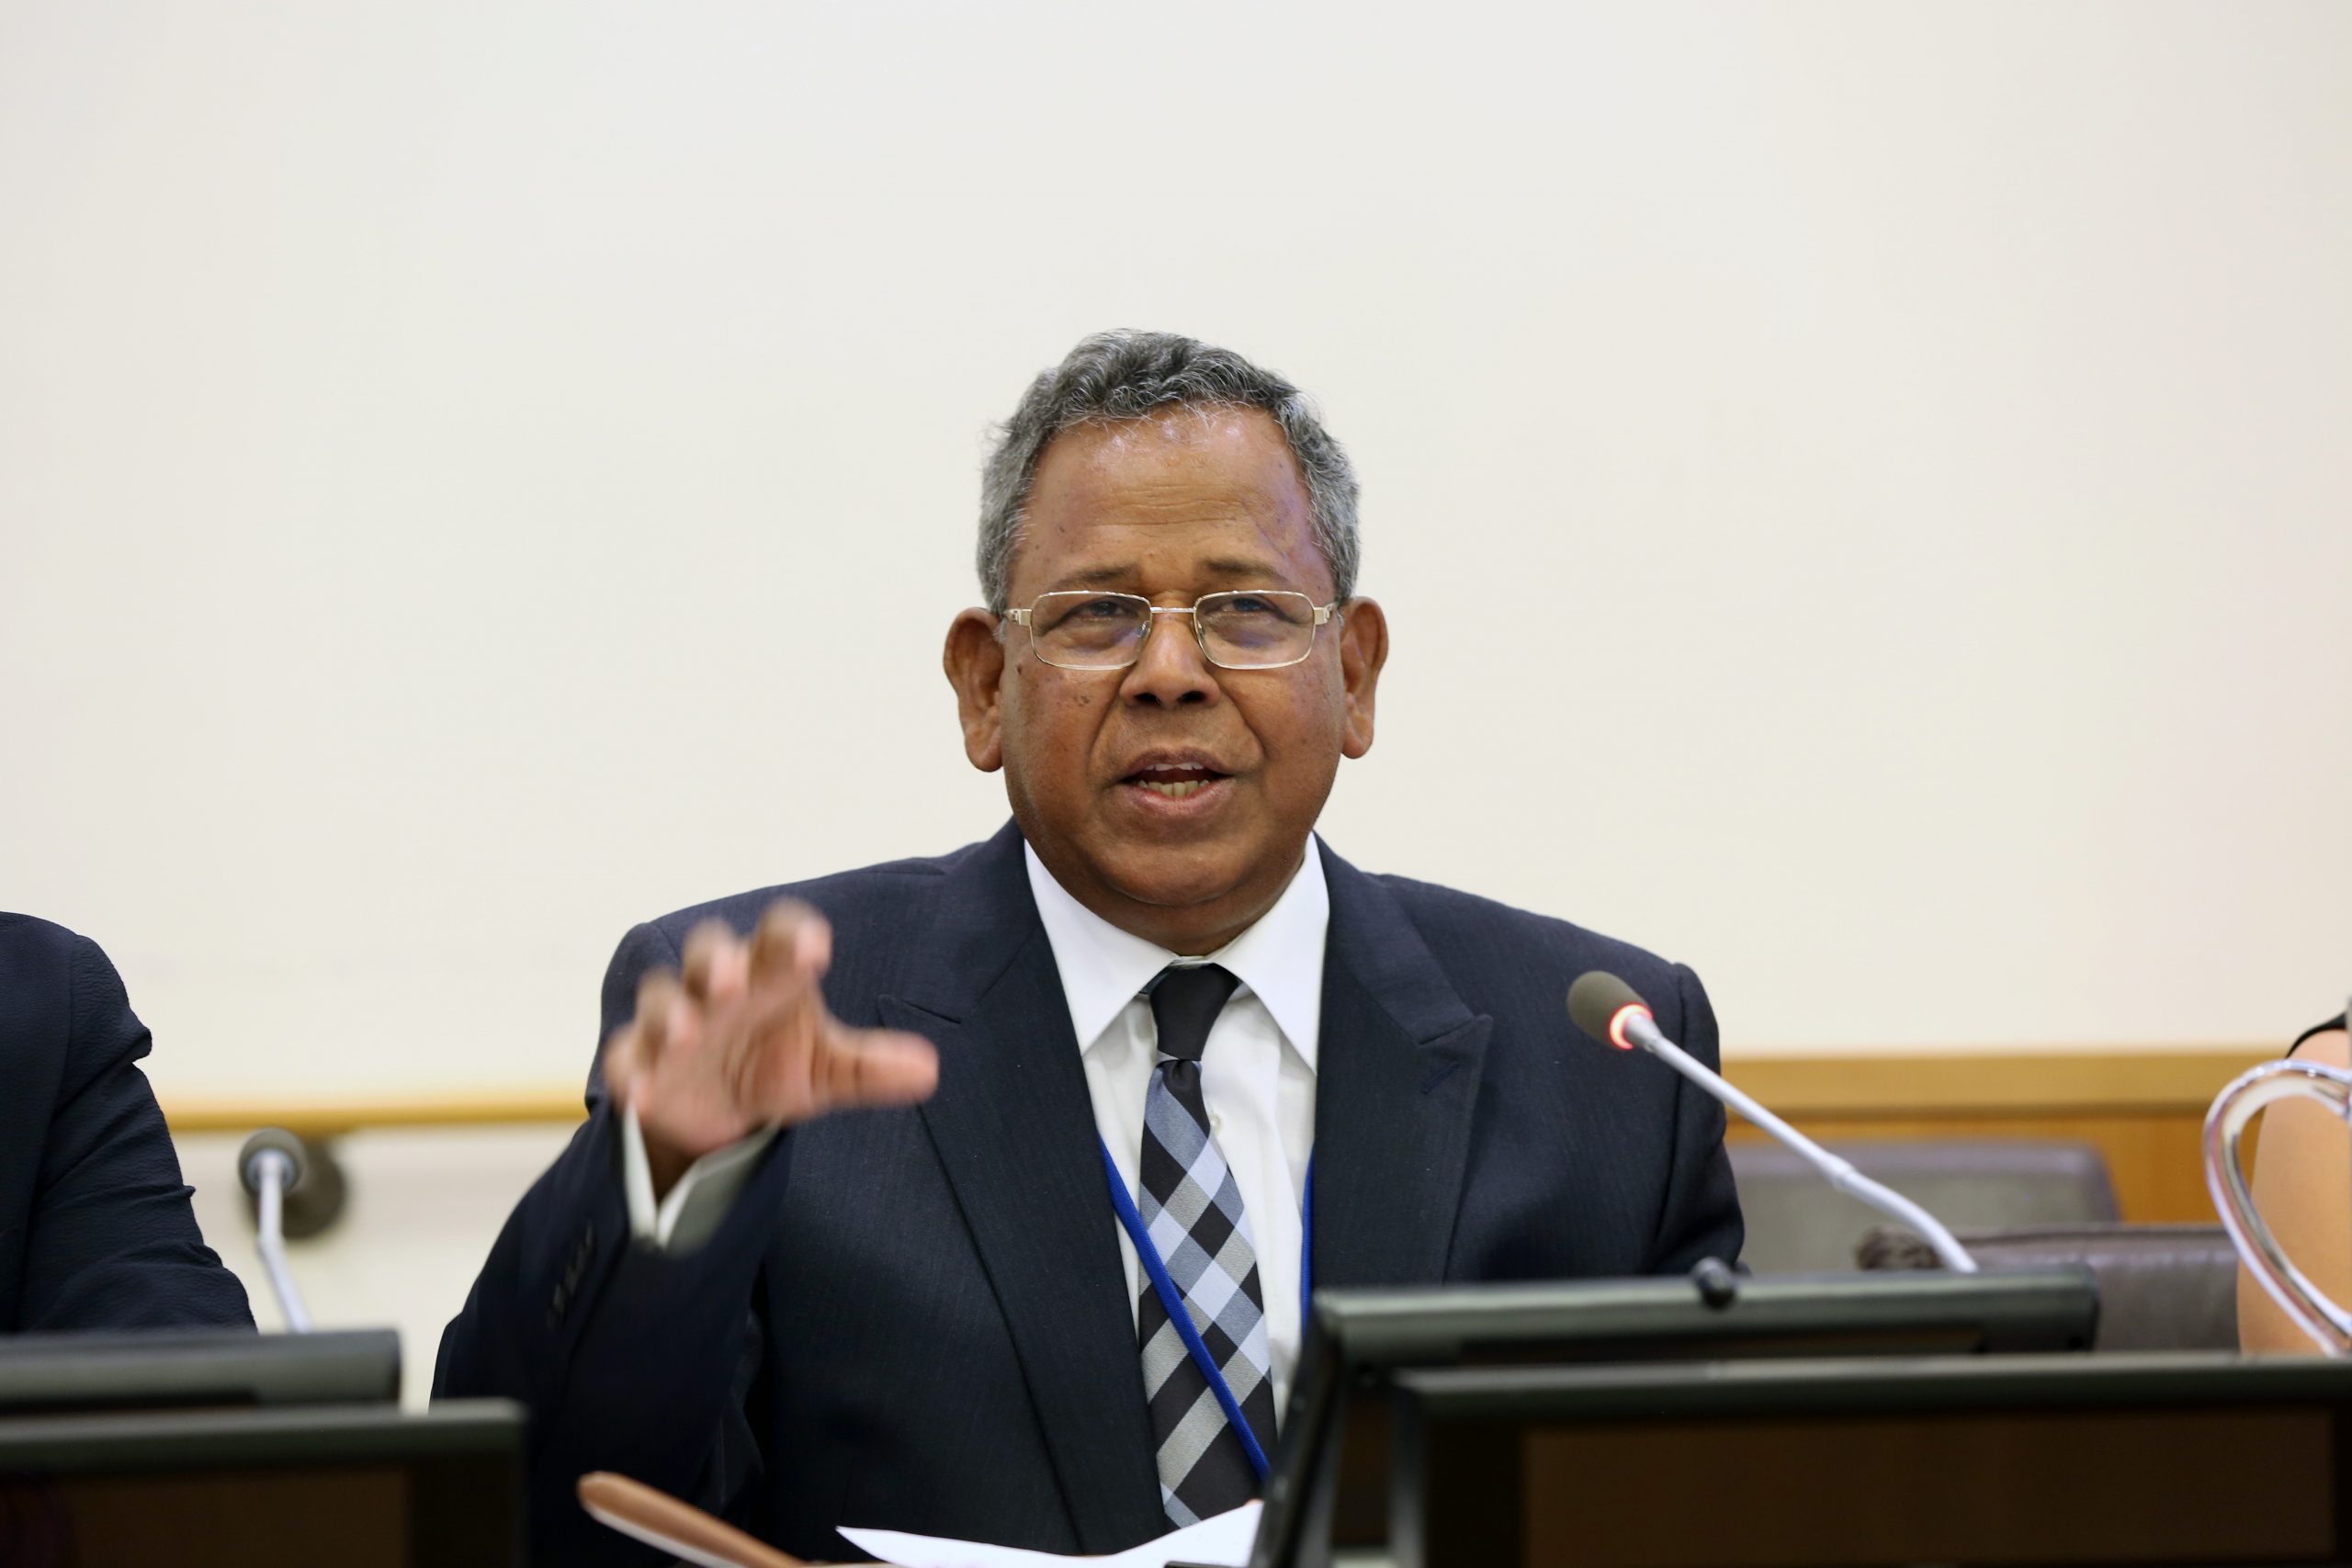 26th session council president